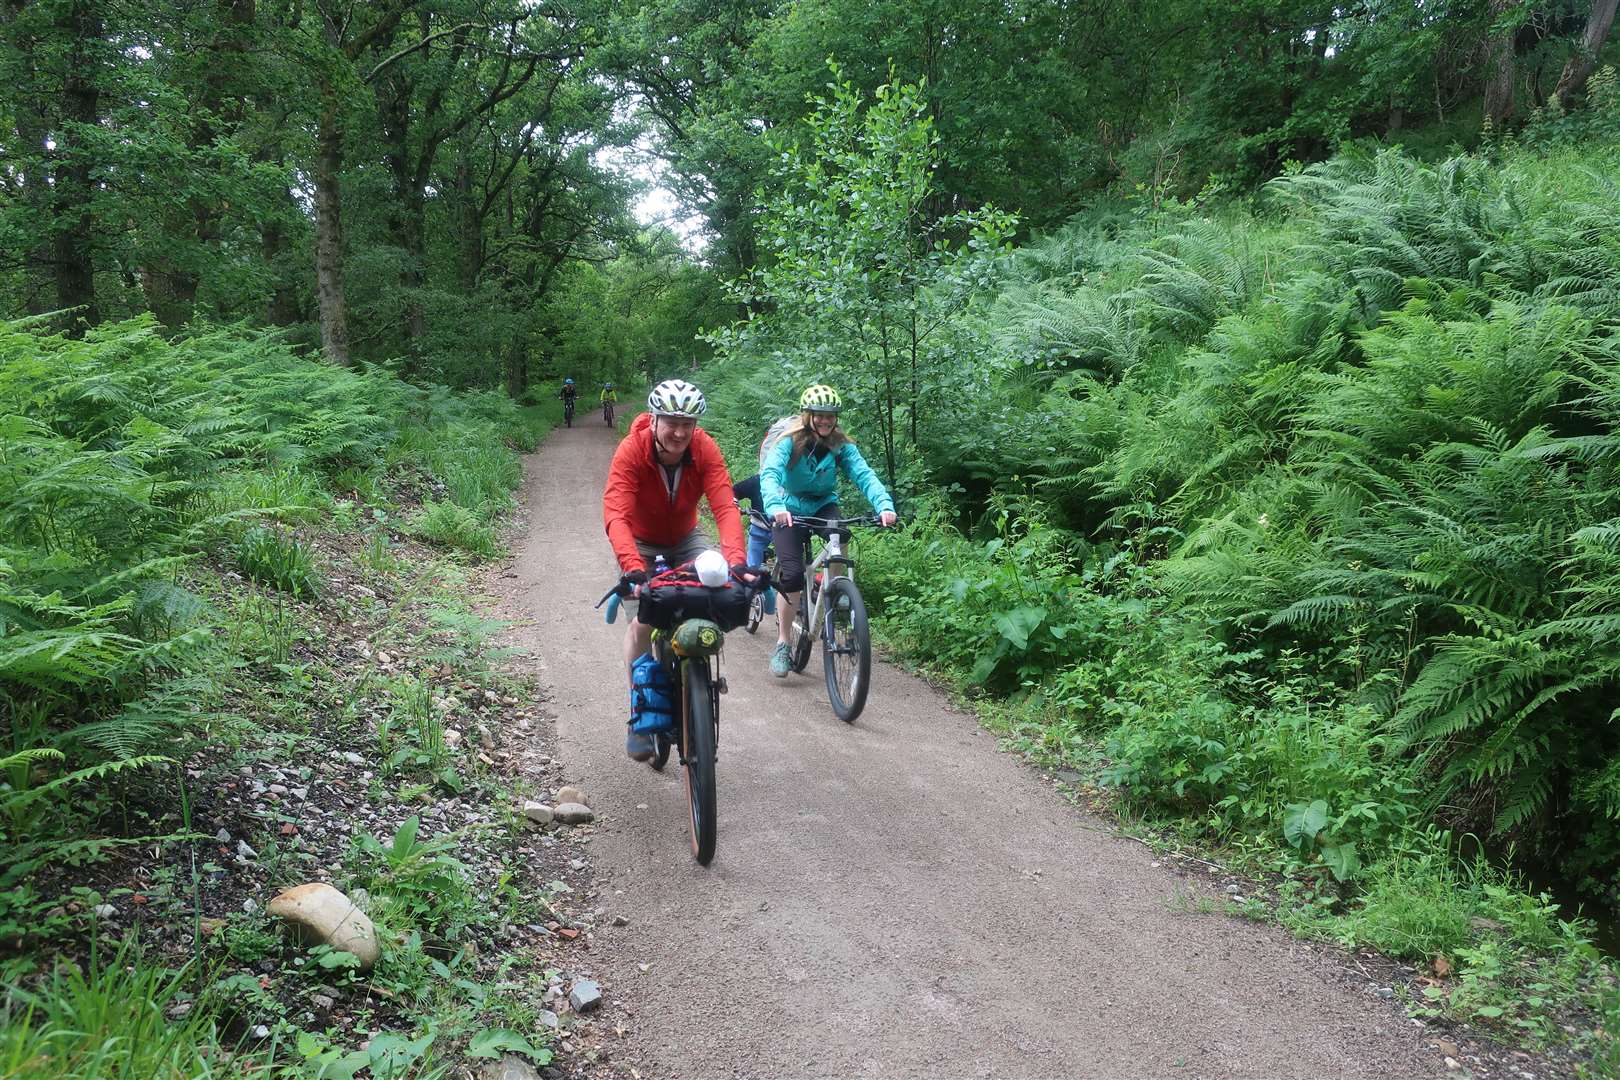 Jim and Meg cycling on the newly surfaced trail.